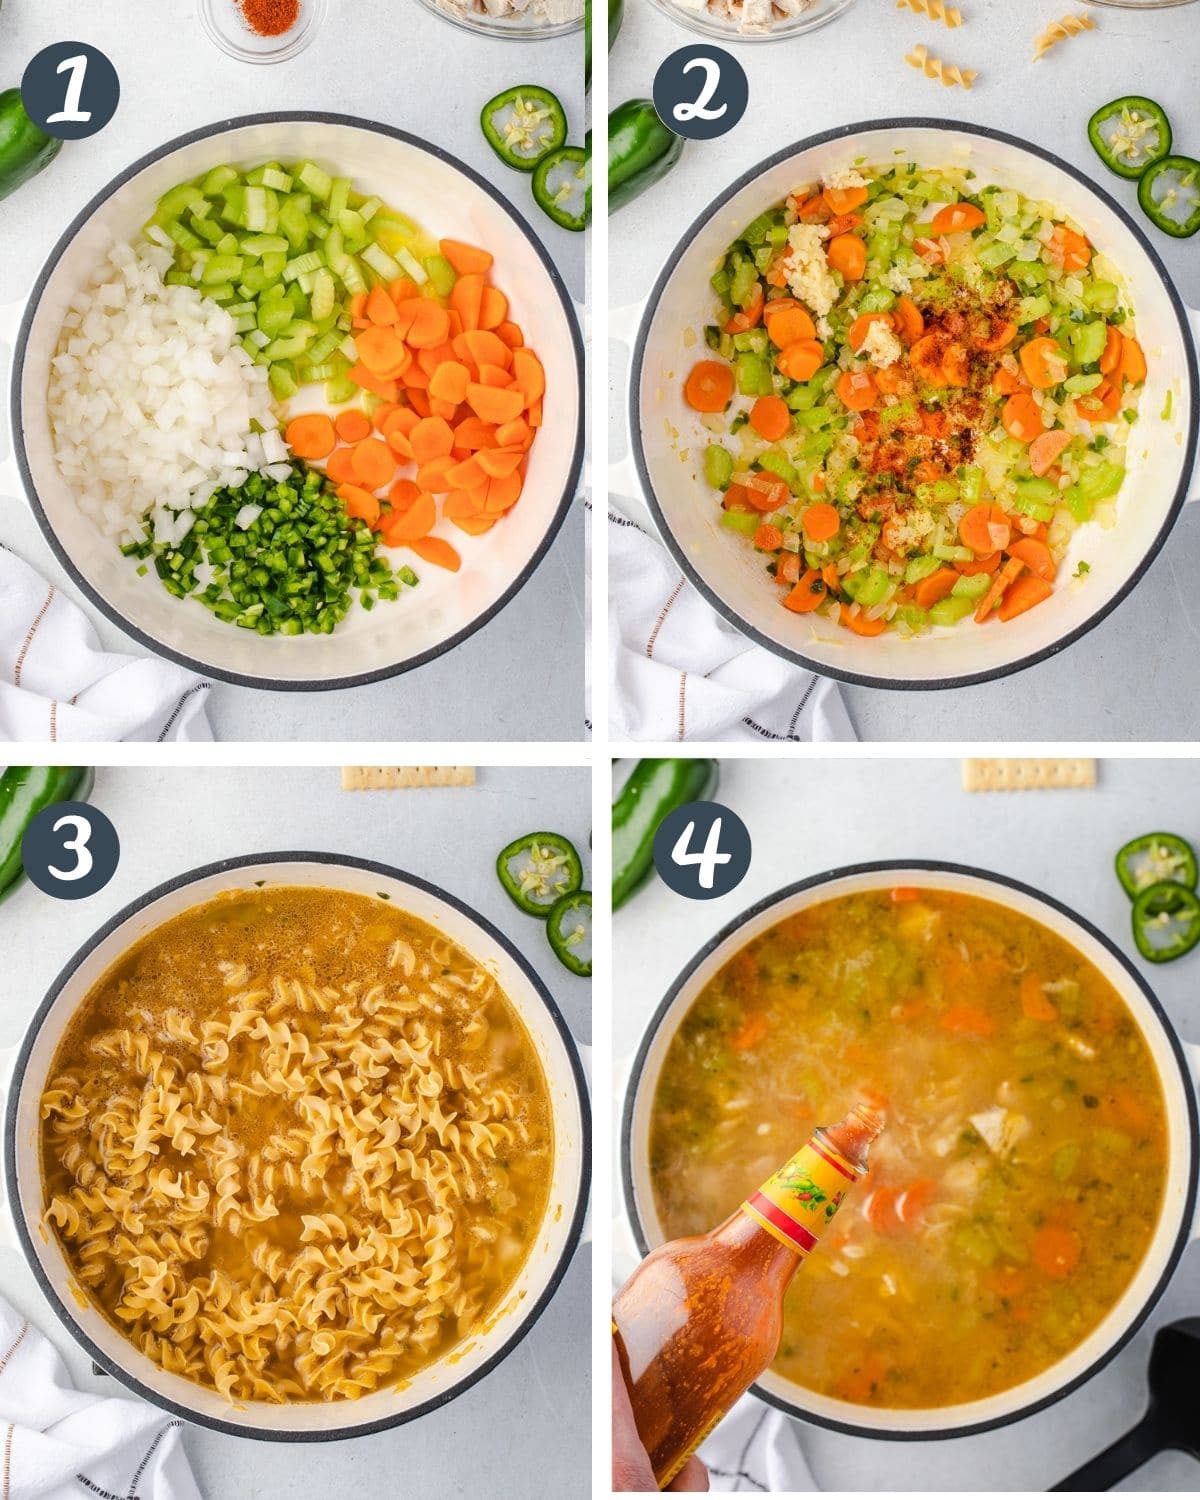 Collage of the 4 steps for making the soup.